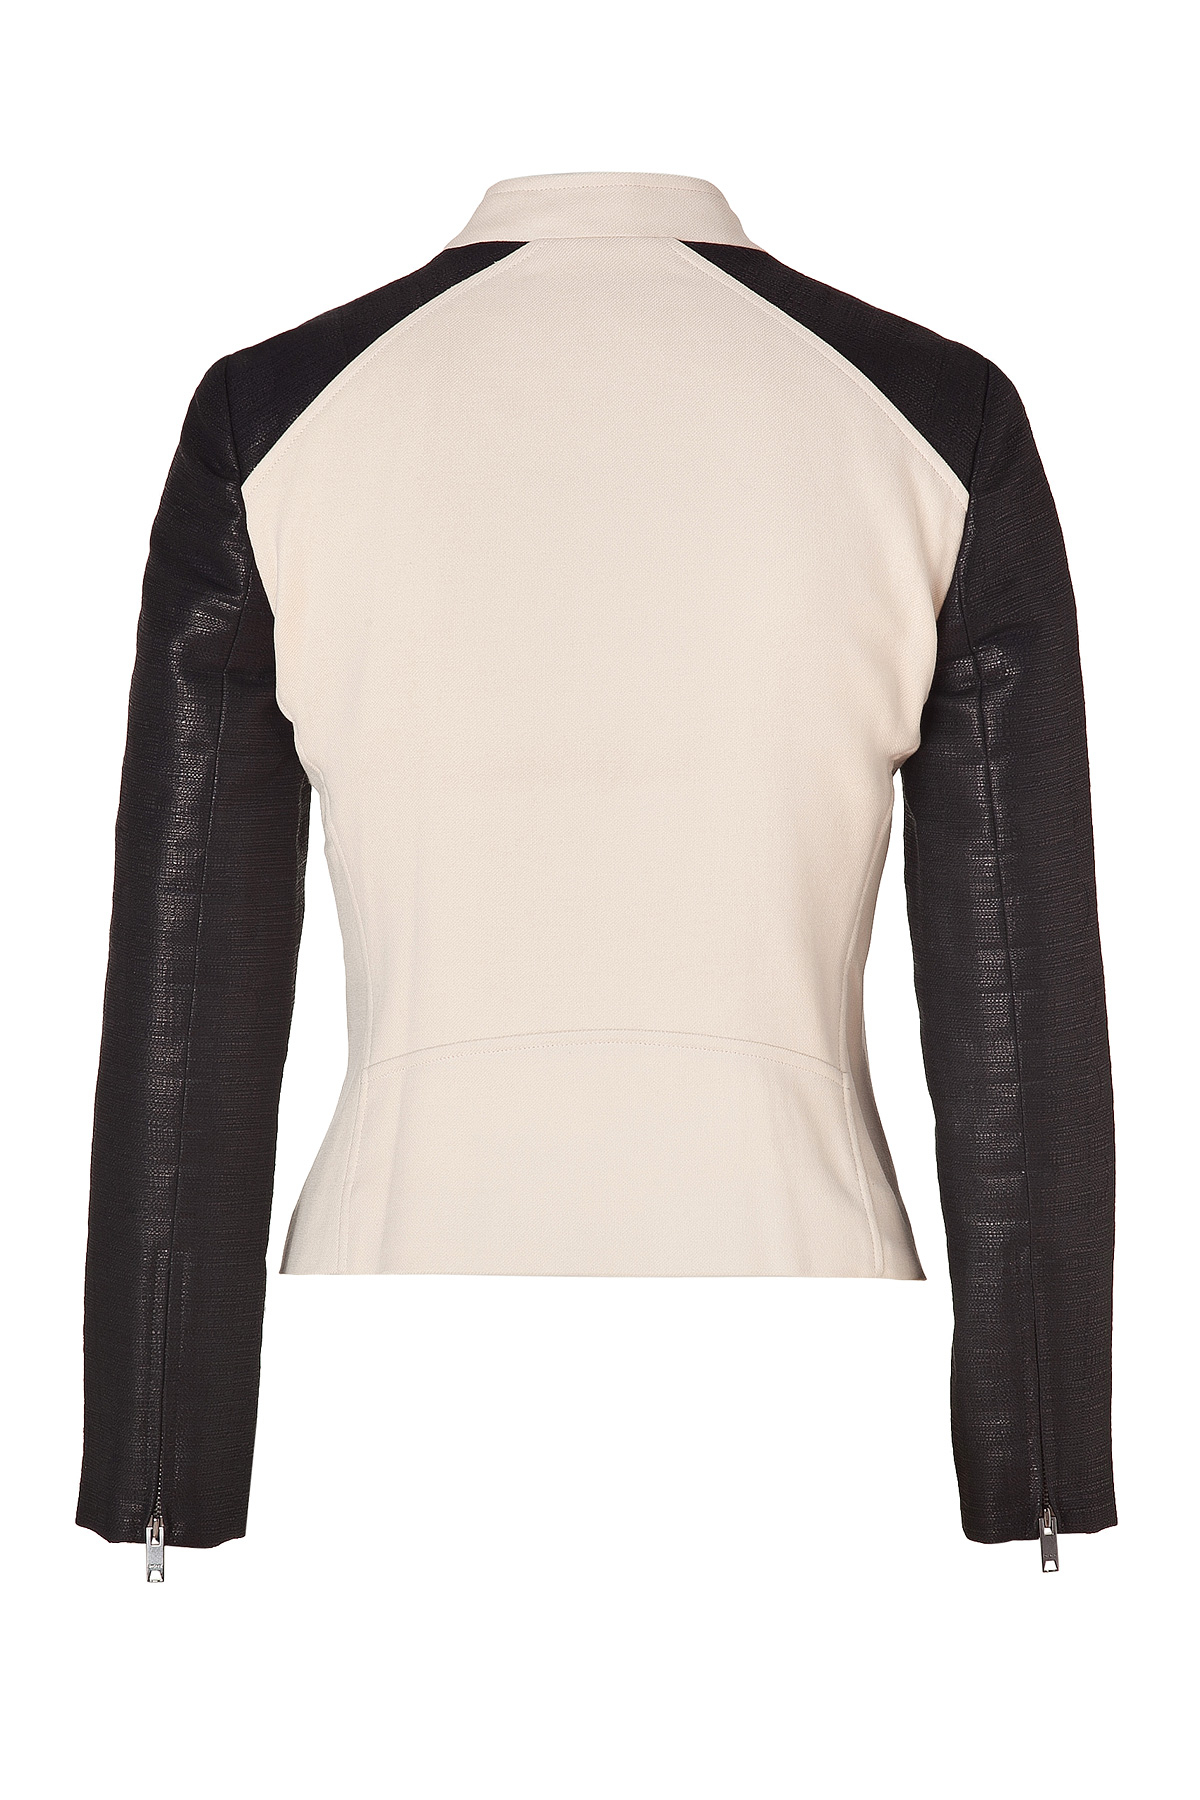 Dkny Black/Cream Colorblocked Stretch Canvas Jacket in White | Lyst